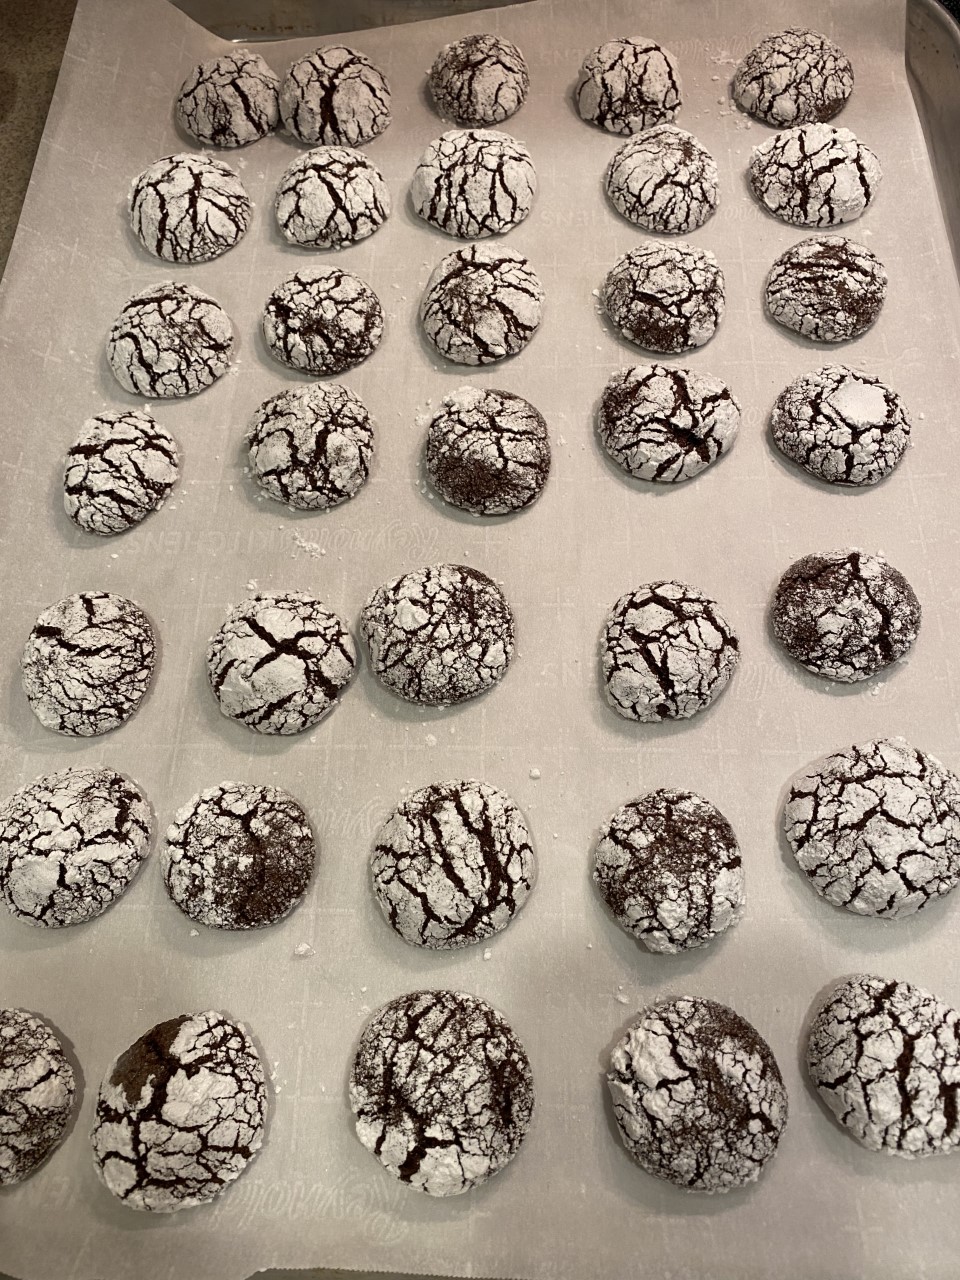 The finished chocolatey, fudgy holiday crinkle cookies on a sheer of parchment, evenly spaced, and looking delicious!